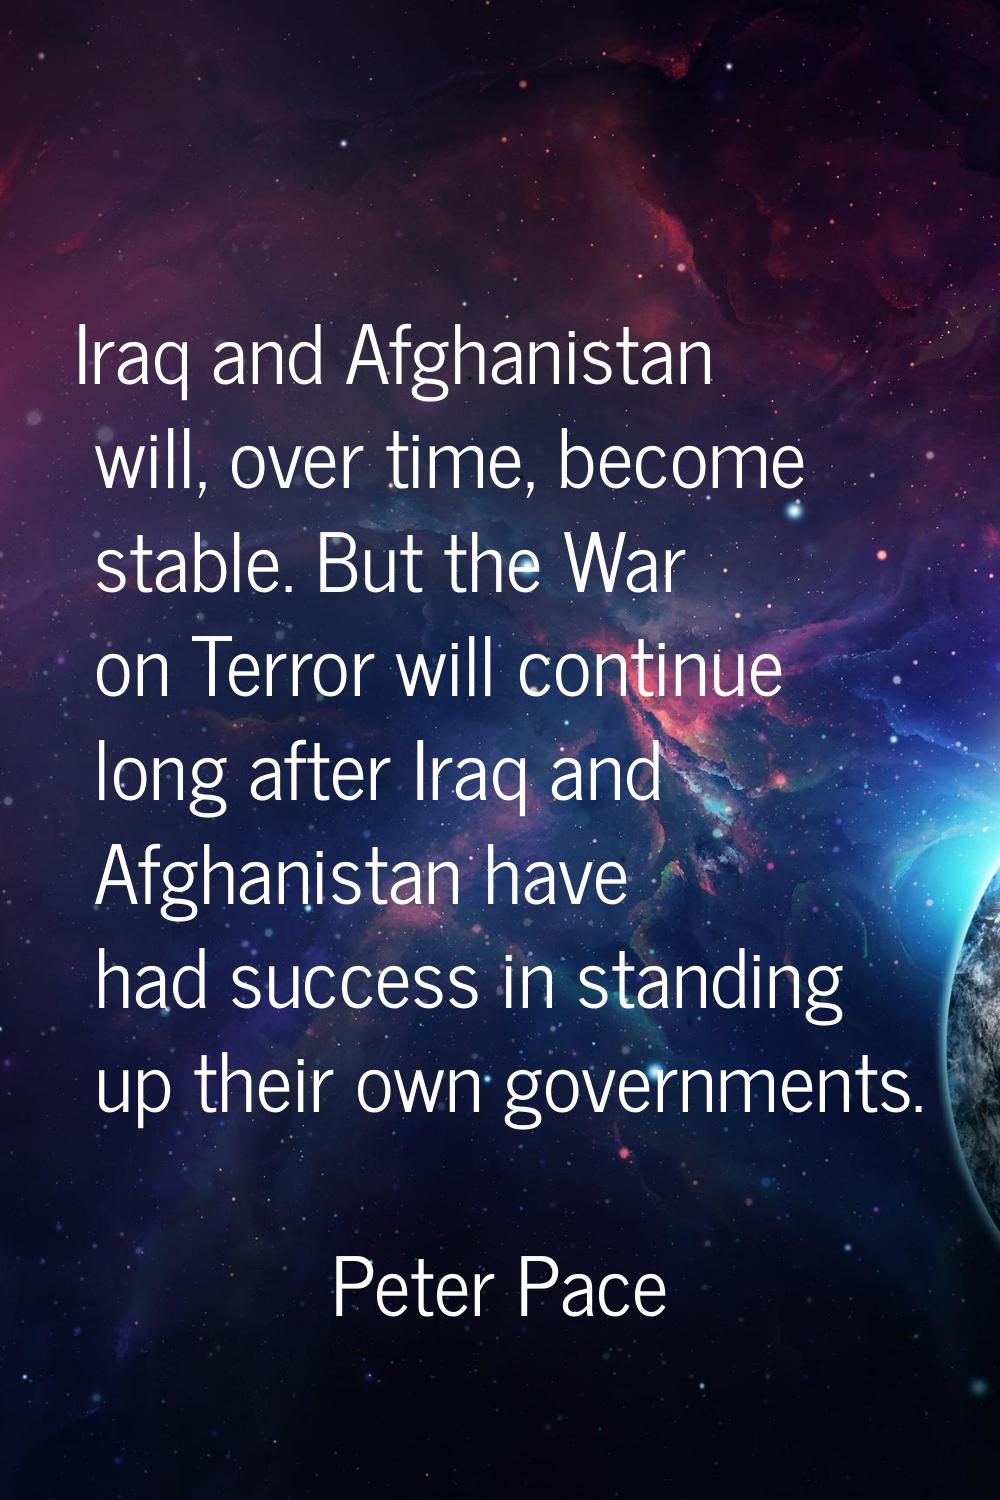 Iraq and Afghanistan will, over time, become stable. But the War on Terror will continue long after